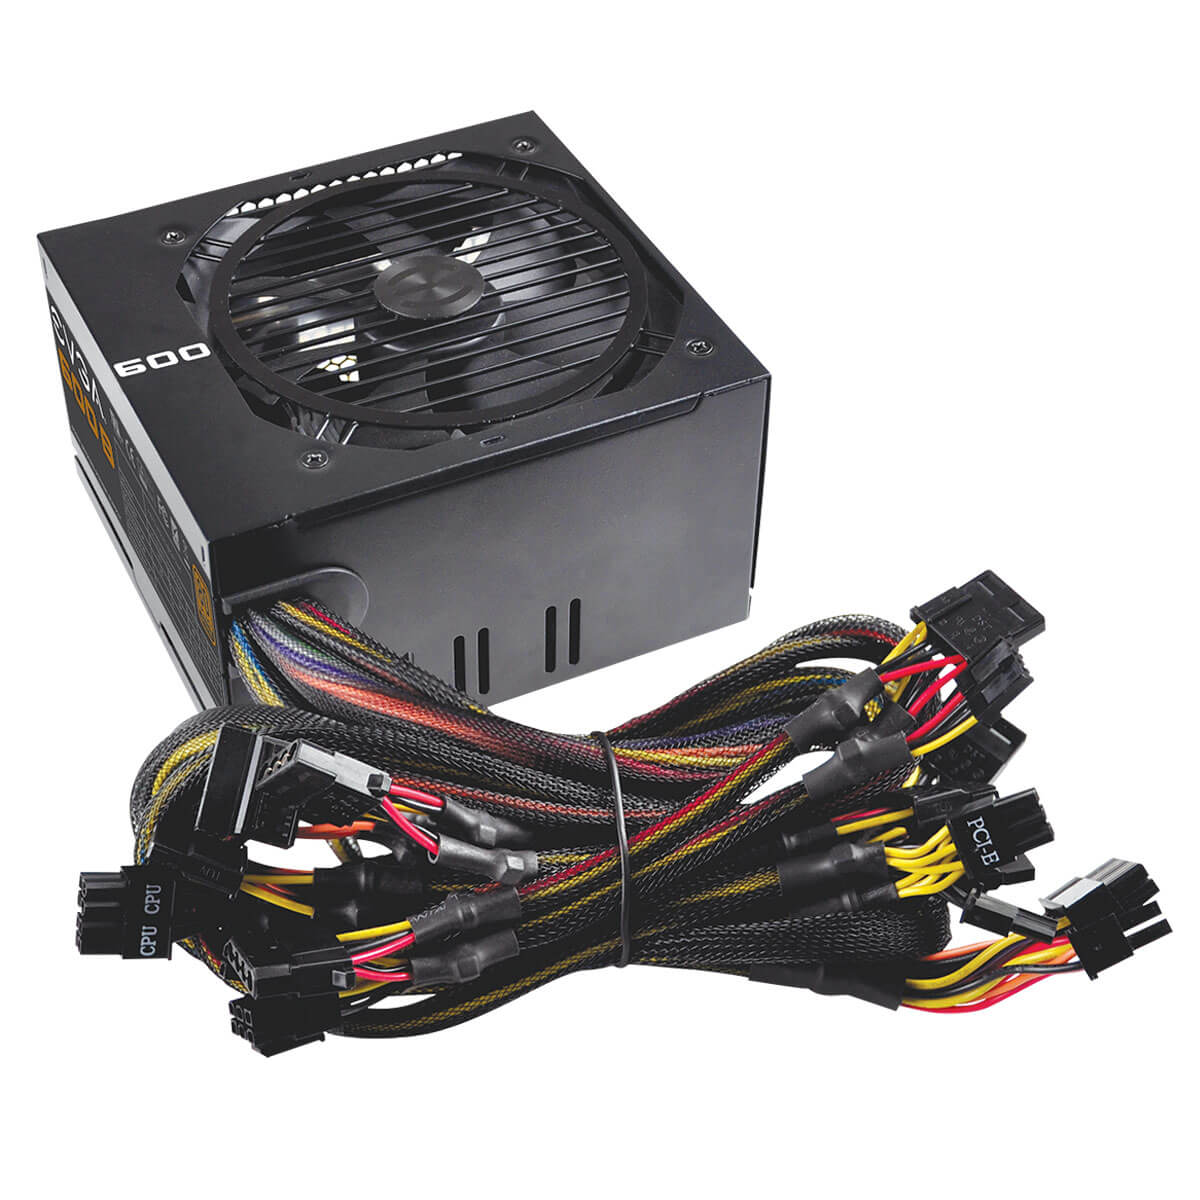 How Much Power Supply do I Need?